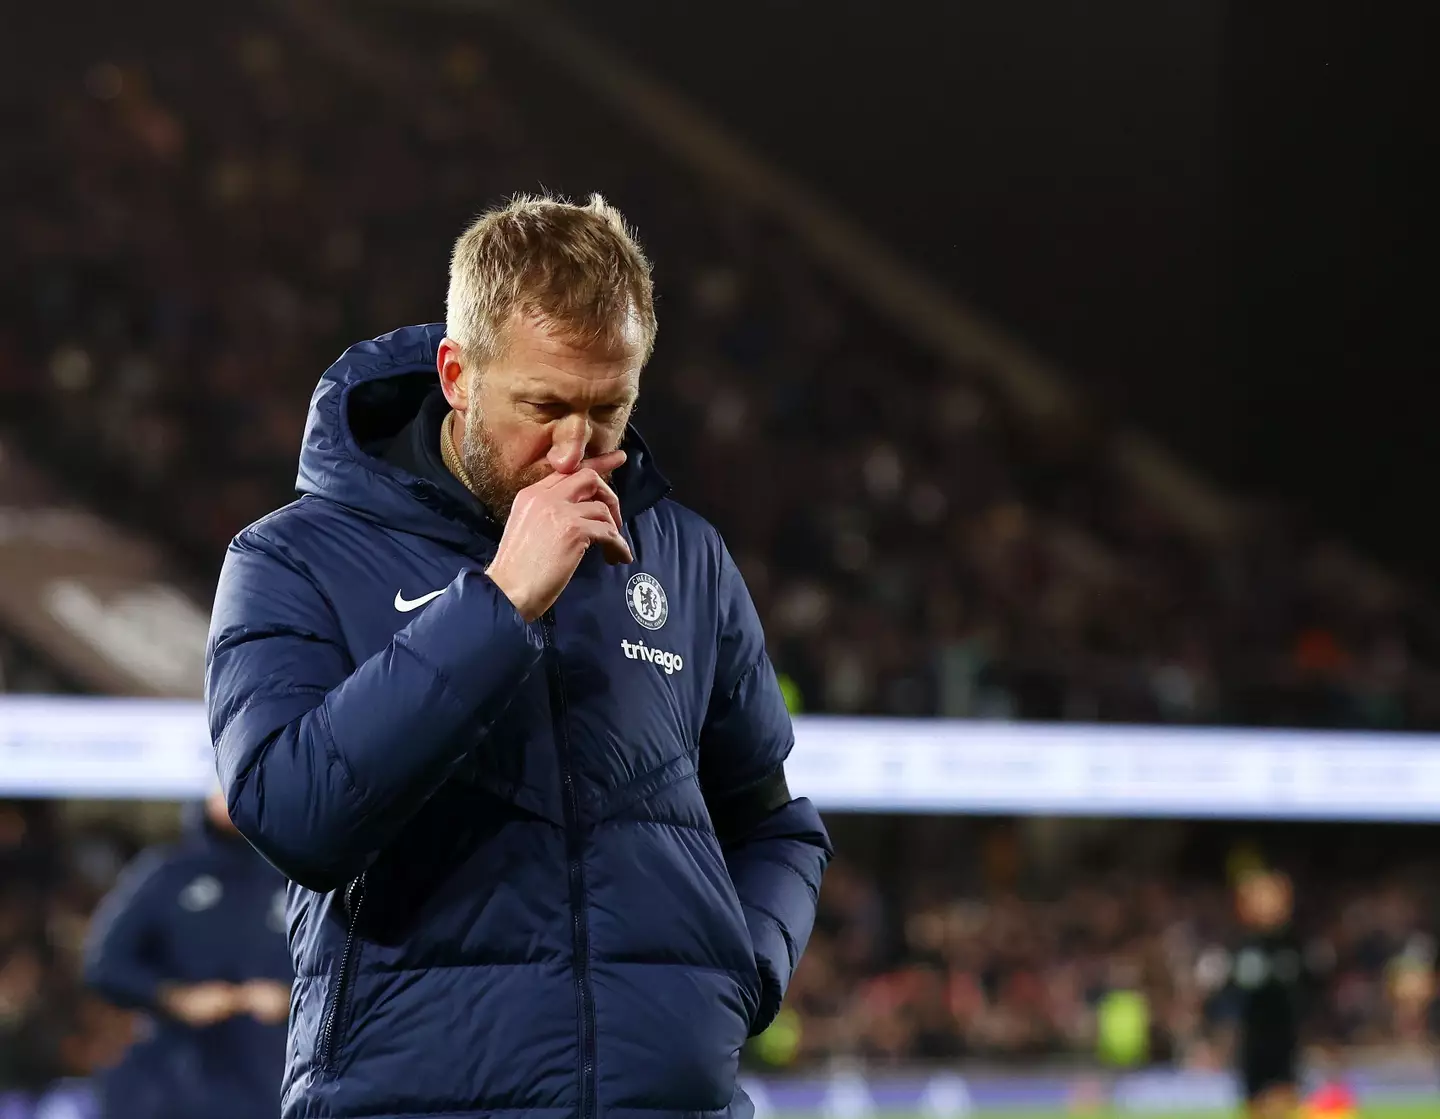 Potter was understandably not happy after his side lost to Fulham. Image: Alamy